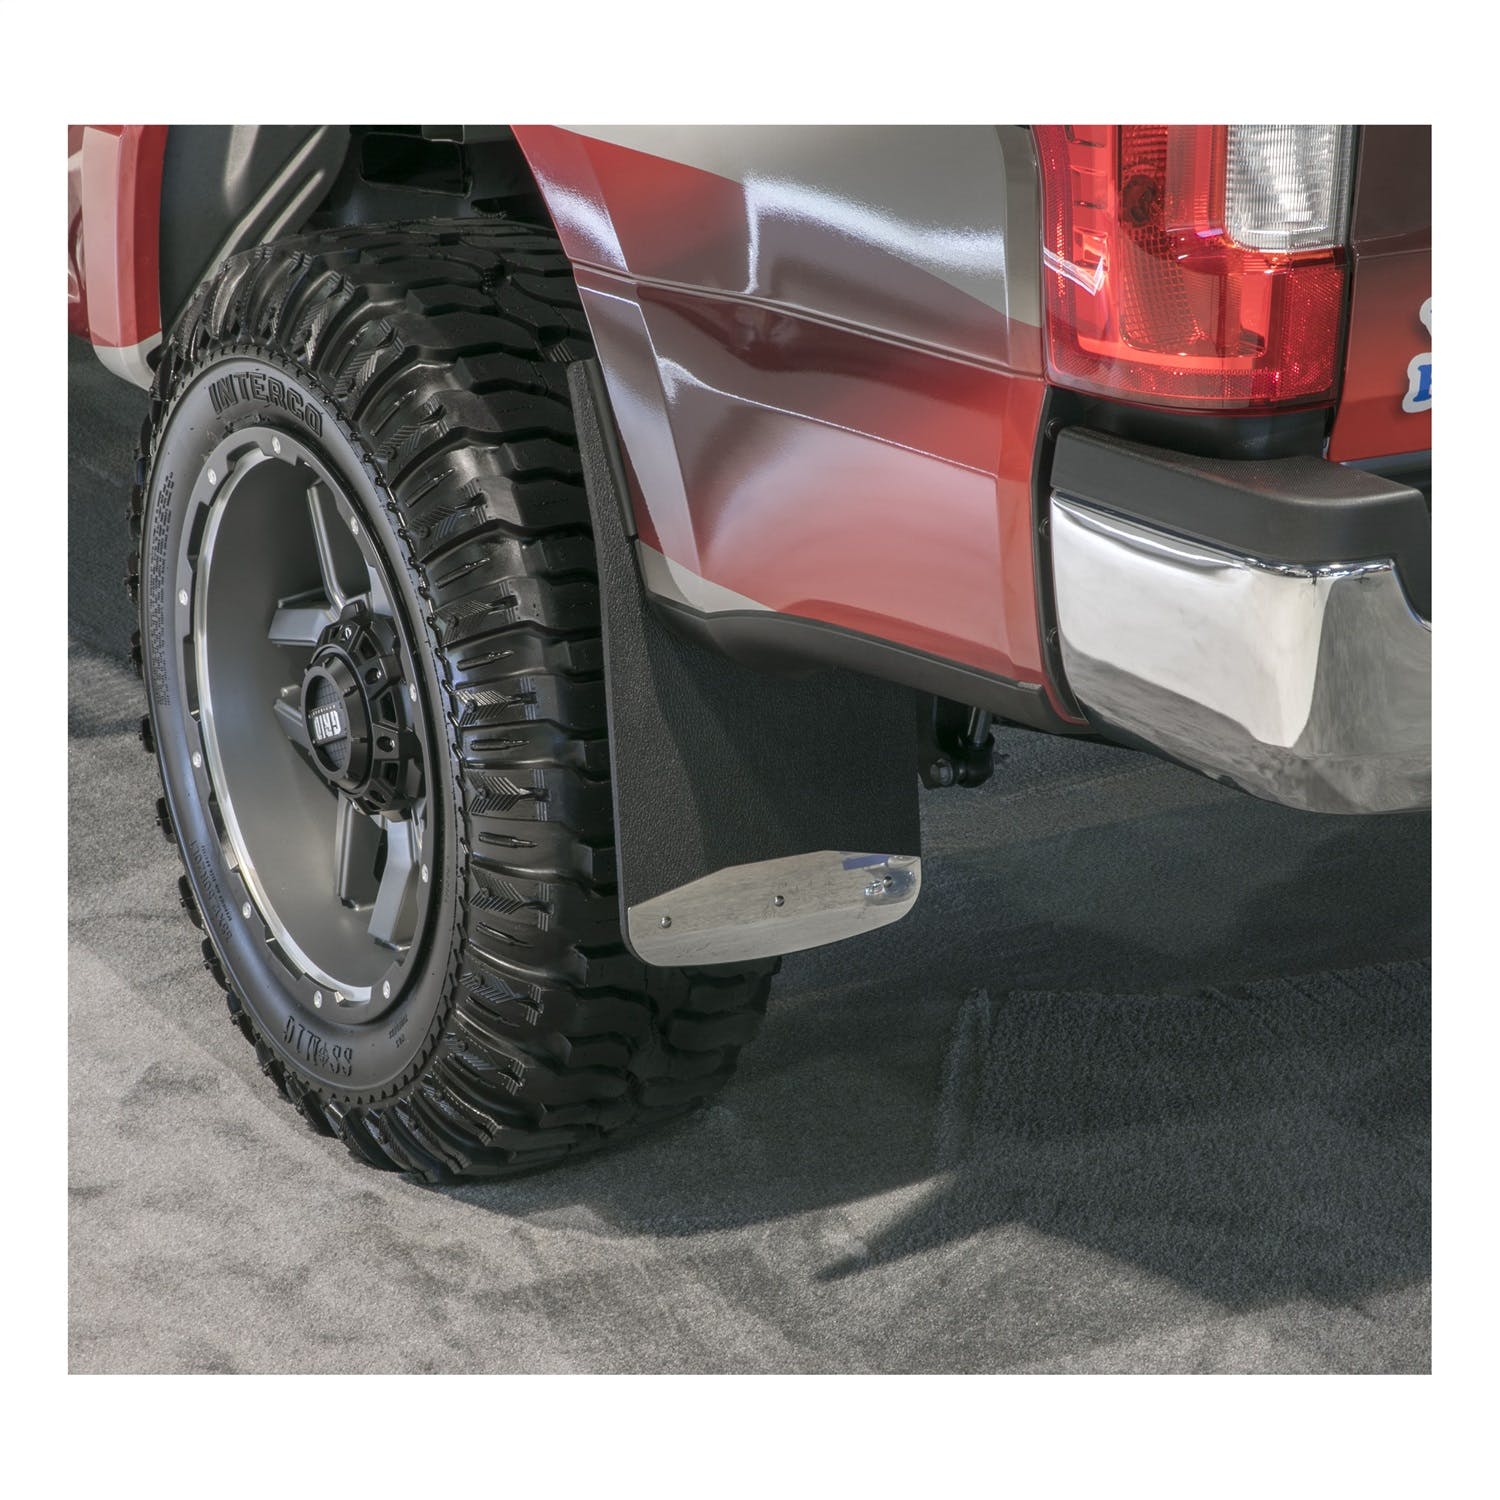 LUVERNE 251441 Textured Rubber Mud Guards - Front 20 inch